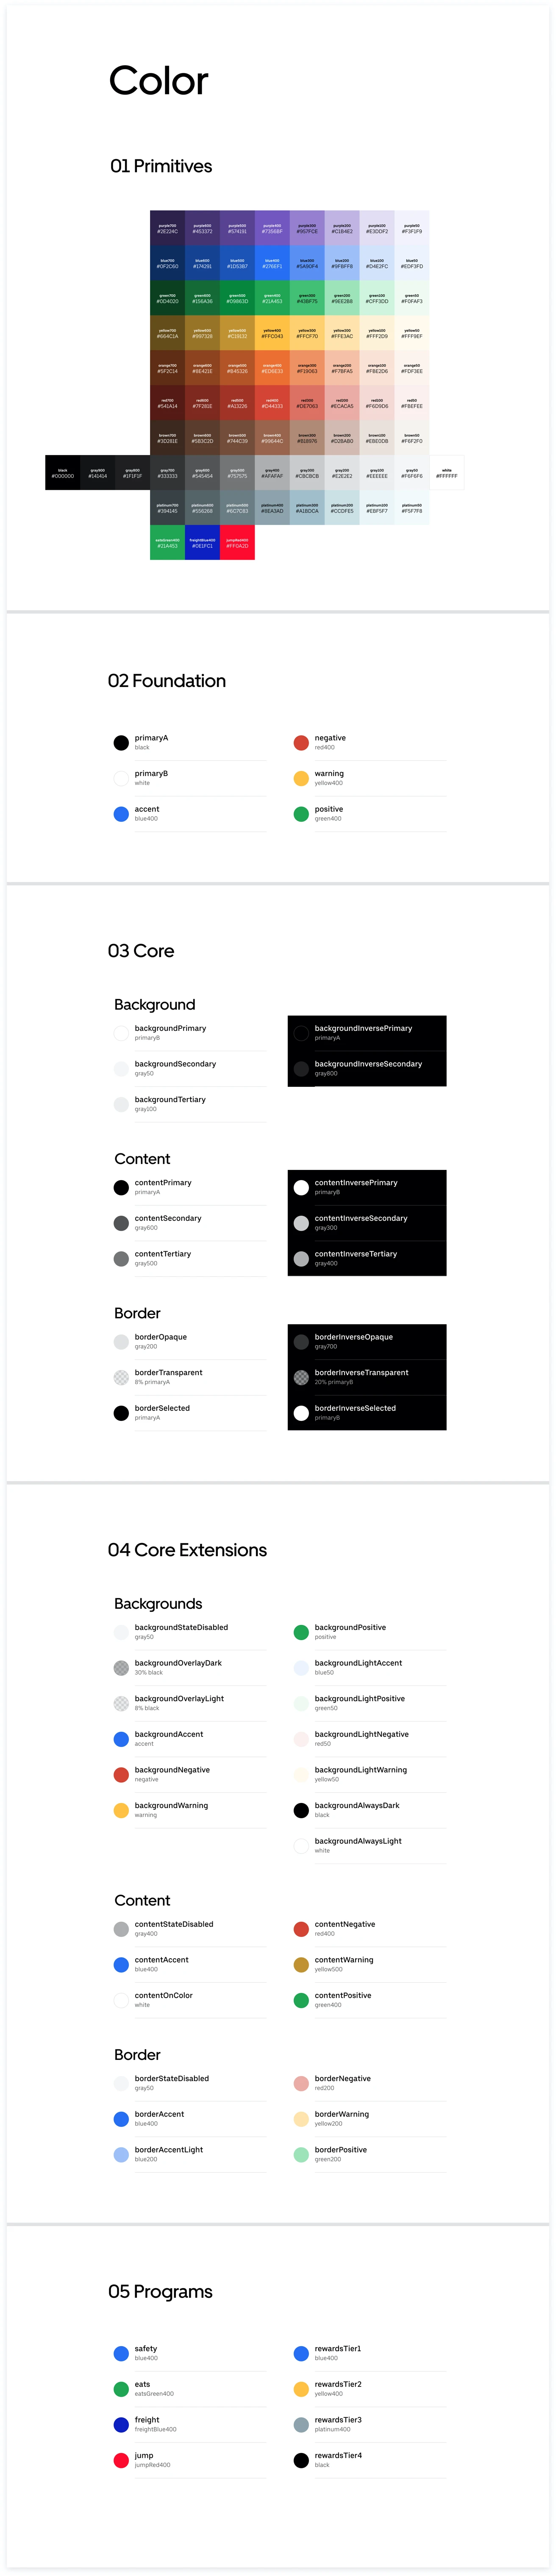 Uber Base Gallery for Figma - Uber Base are the core UI components that define the foundations of Uber’s user interface. It brings all our Uber experiences together,  under a single, unified framework.